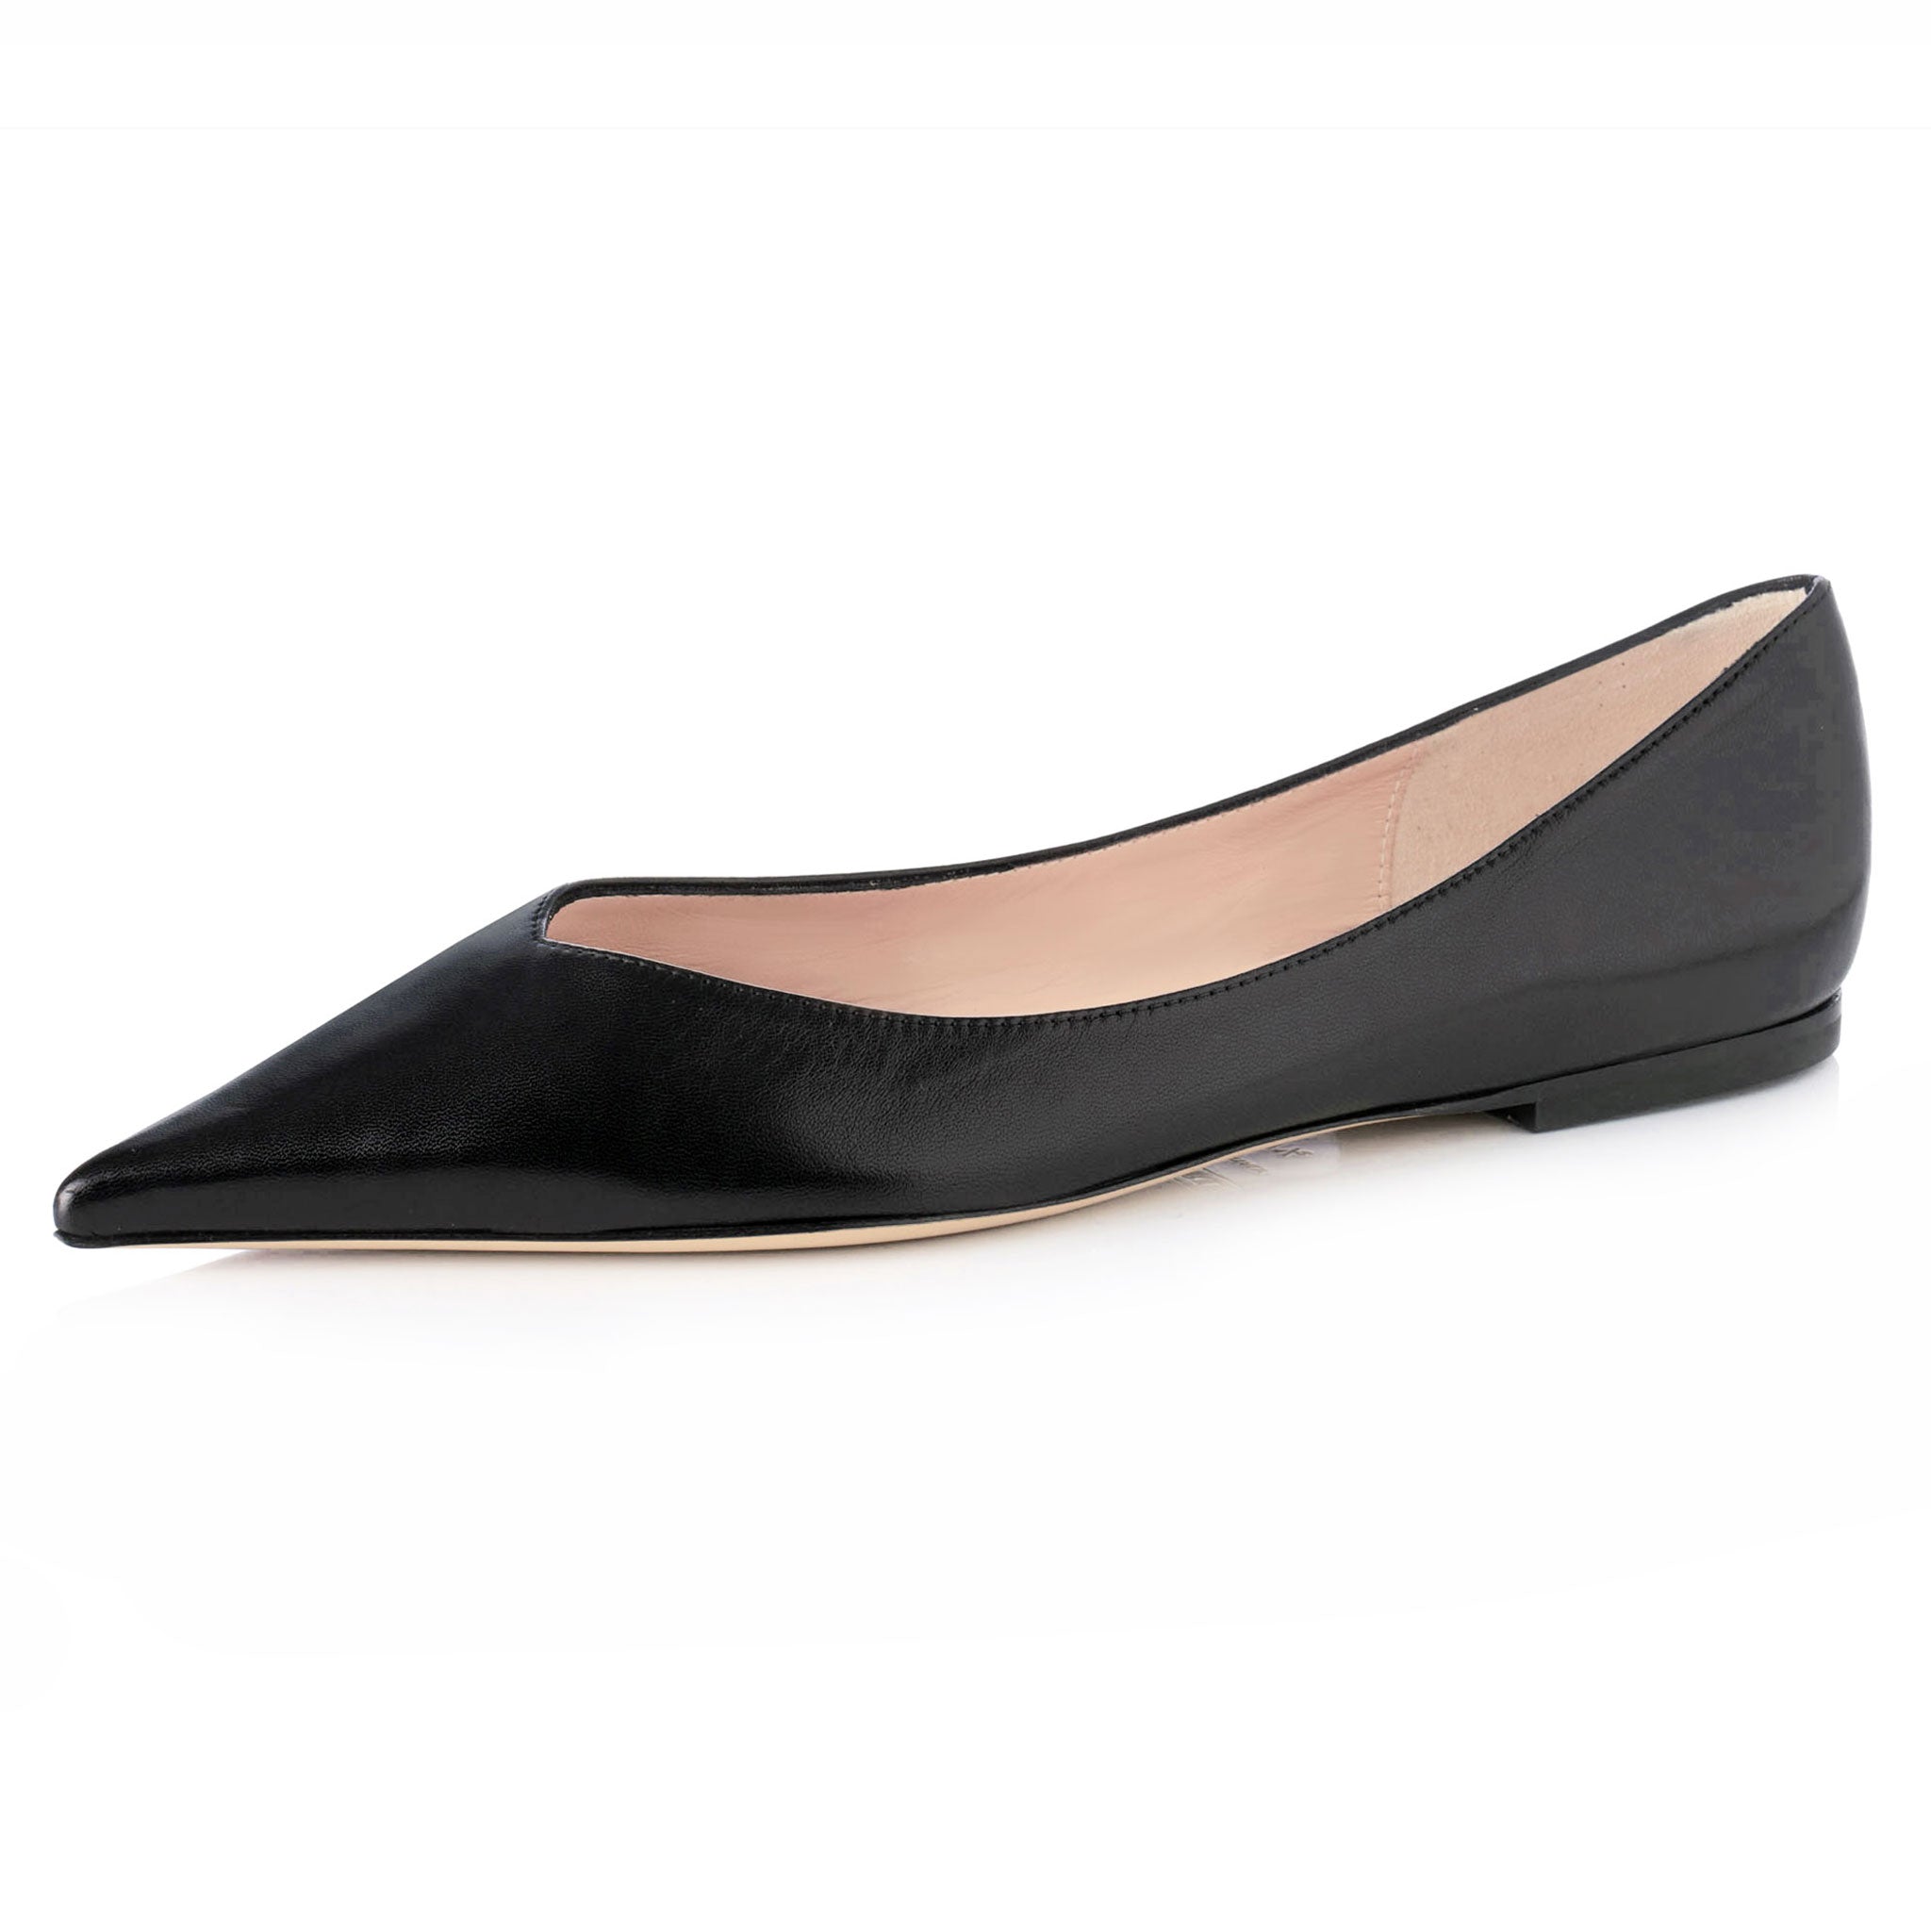 slip on flat pointed toe shoes in a luxurious smooth black leather 